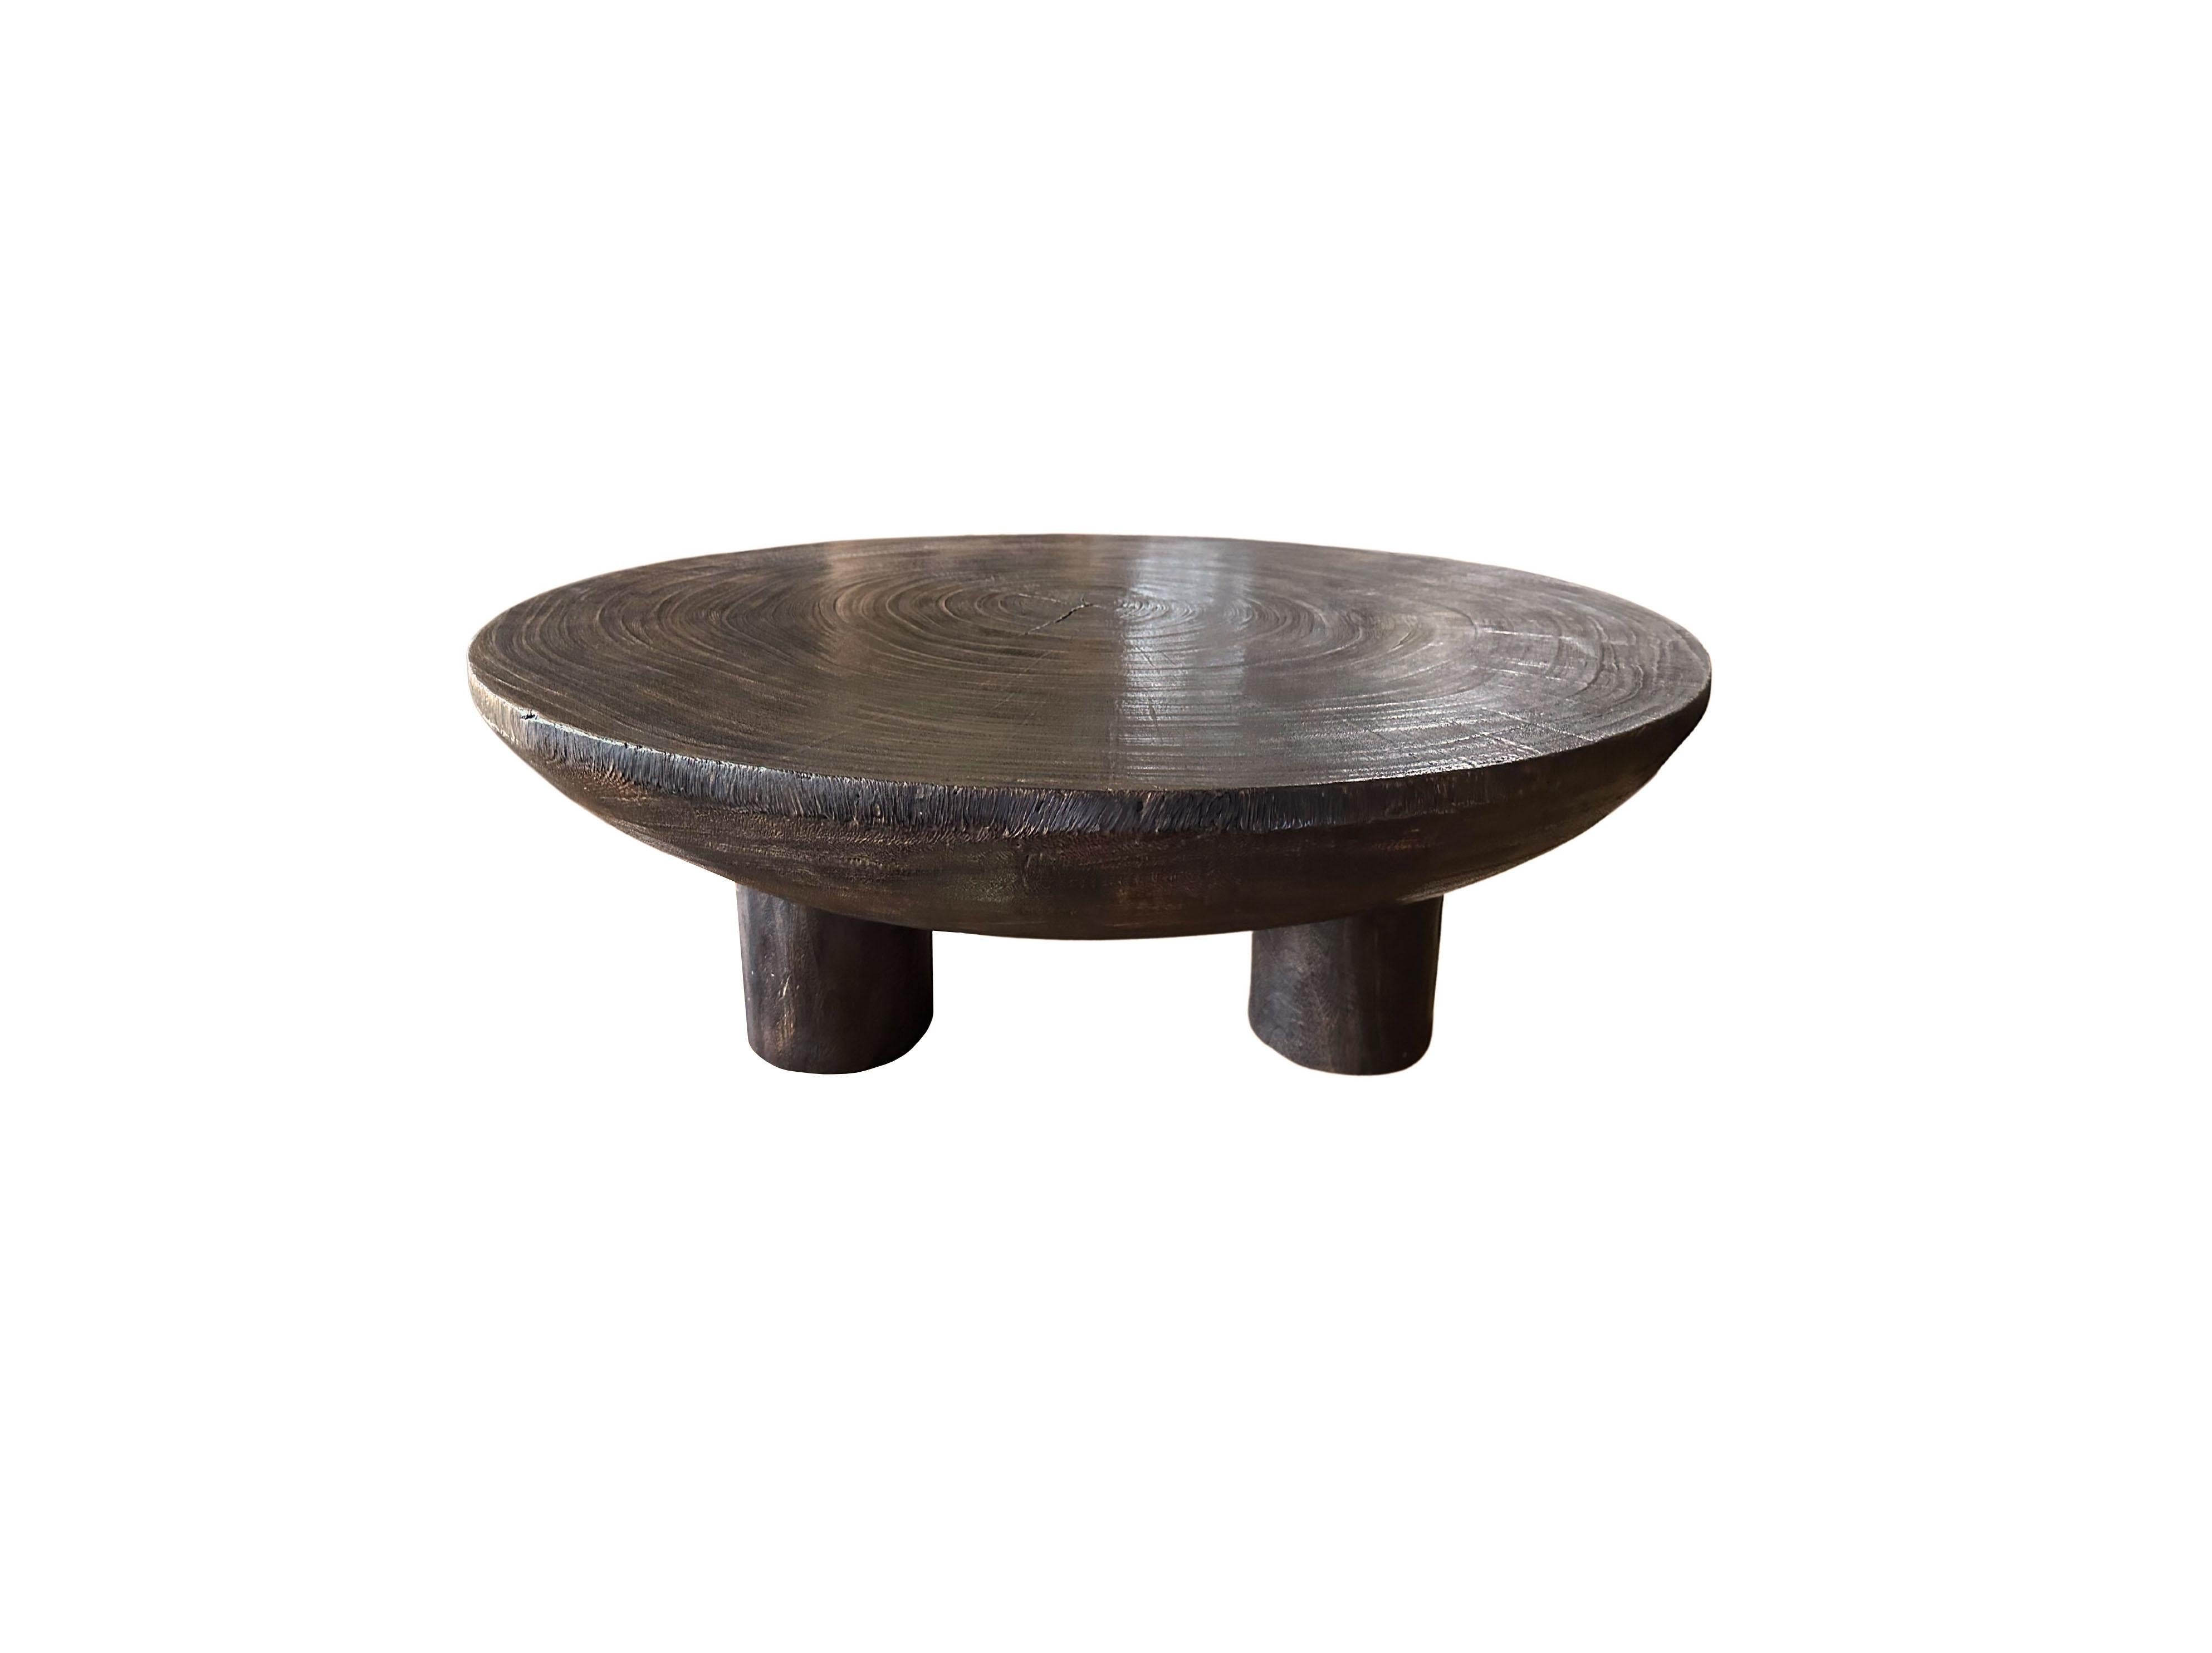 A wonderfully sculptural round table crafted from suar wood. To achieve its pigment the wood was burnt numerous times and then finished with a clear coat. The mix of wood textures and shades adds to its charm. The 